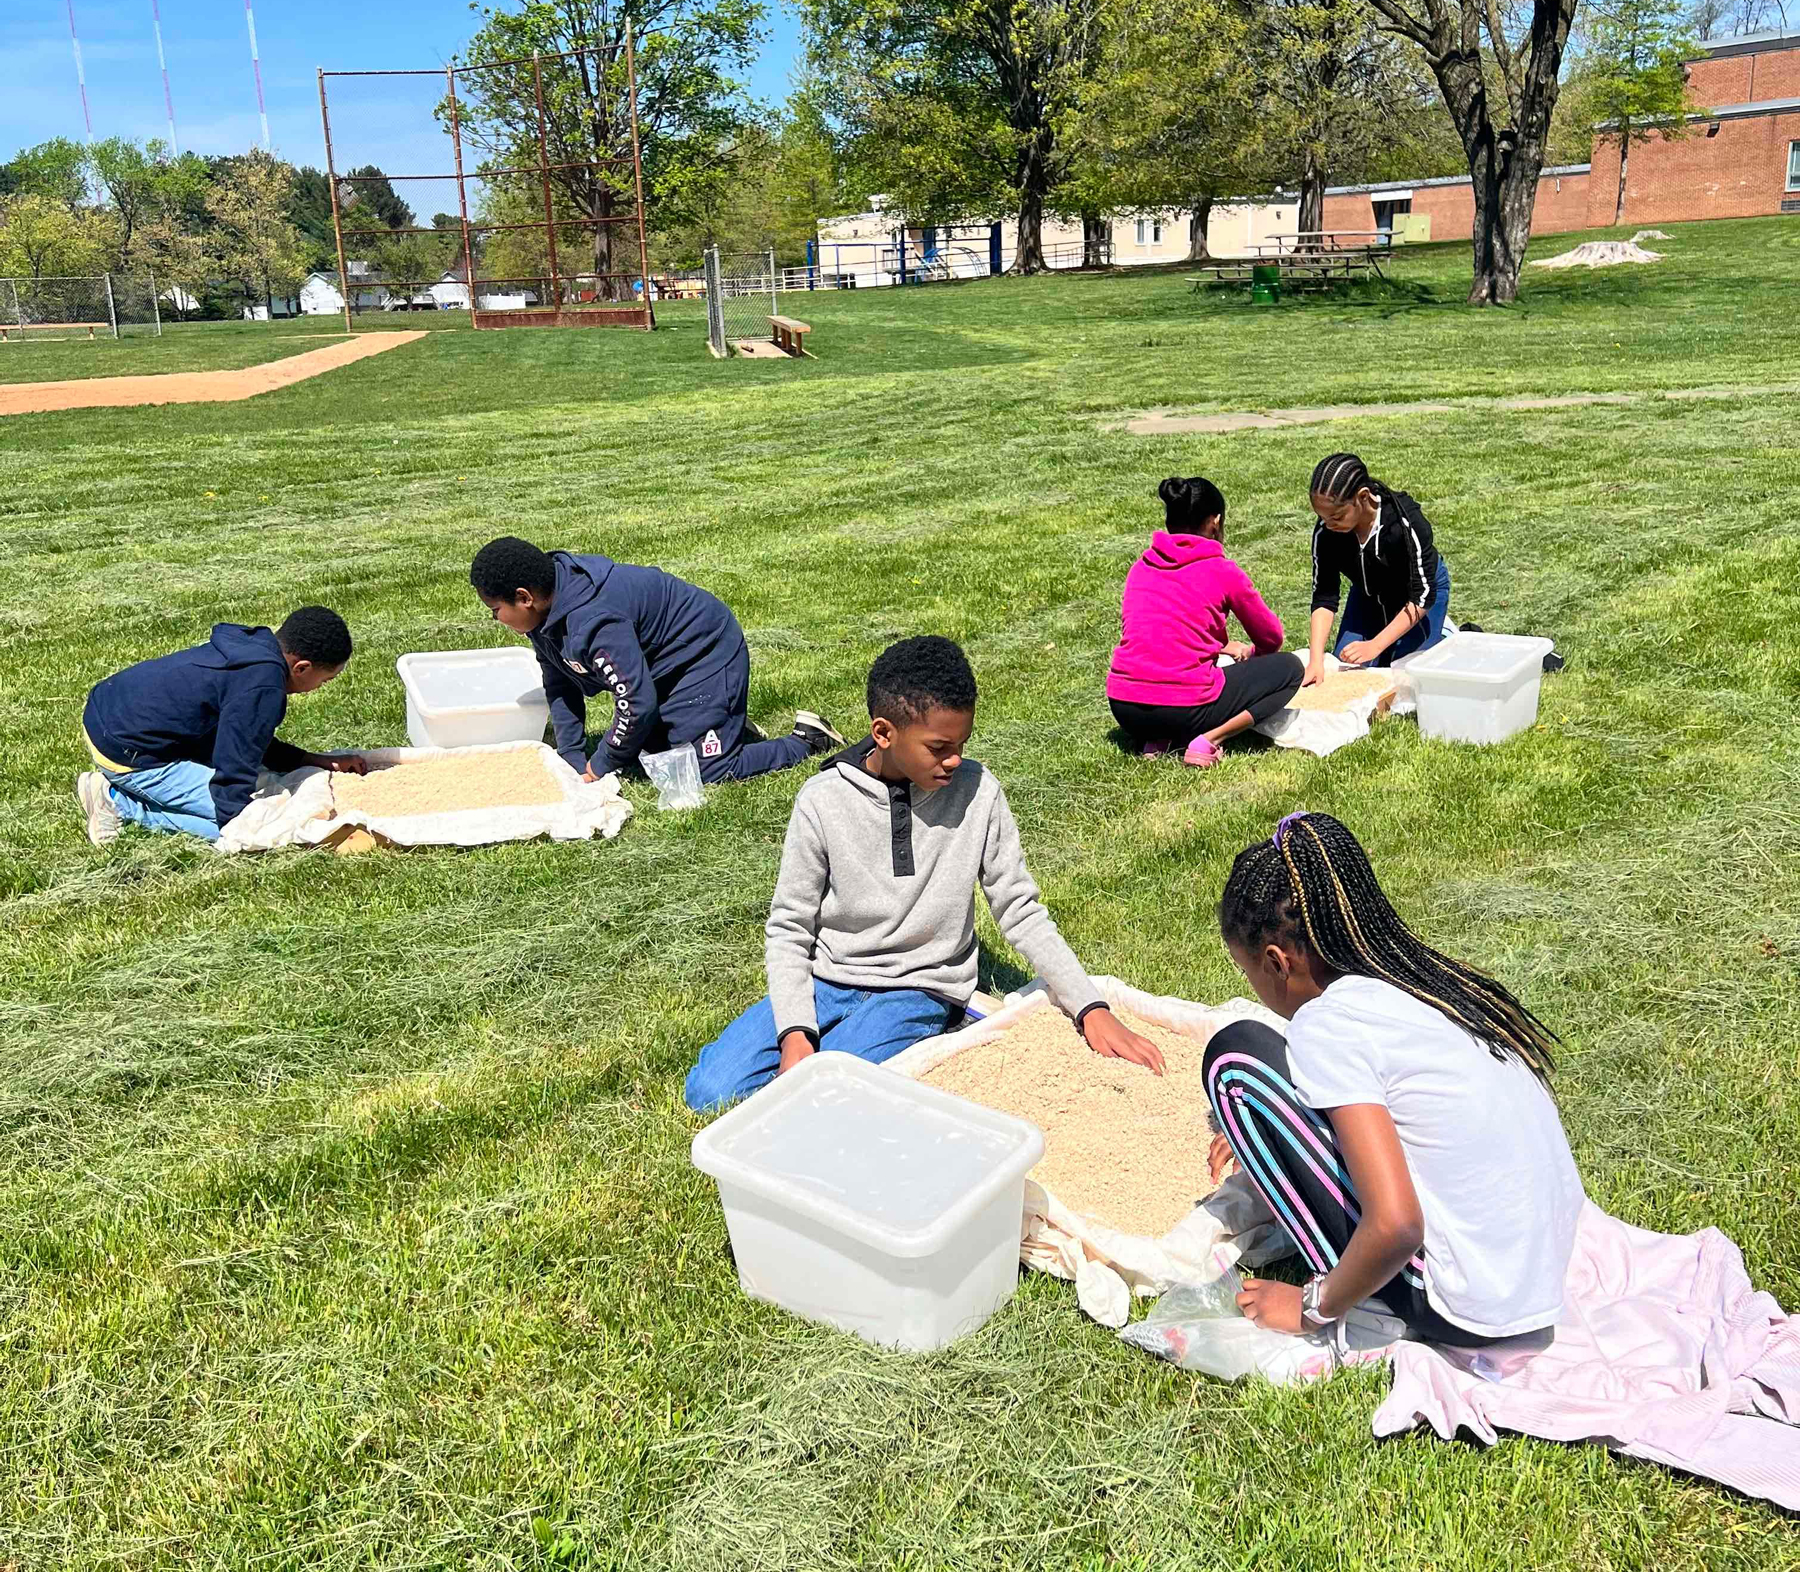 In pairs, Black elementary schoolers explore pans of sand and dirt as part of an archaeology course